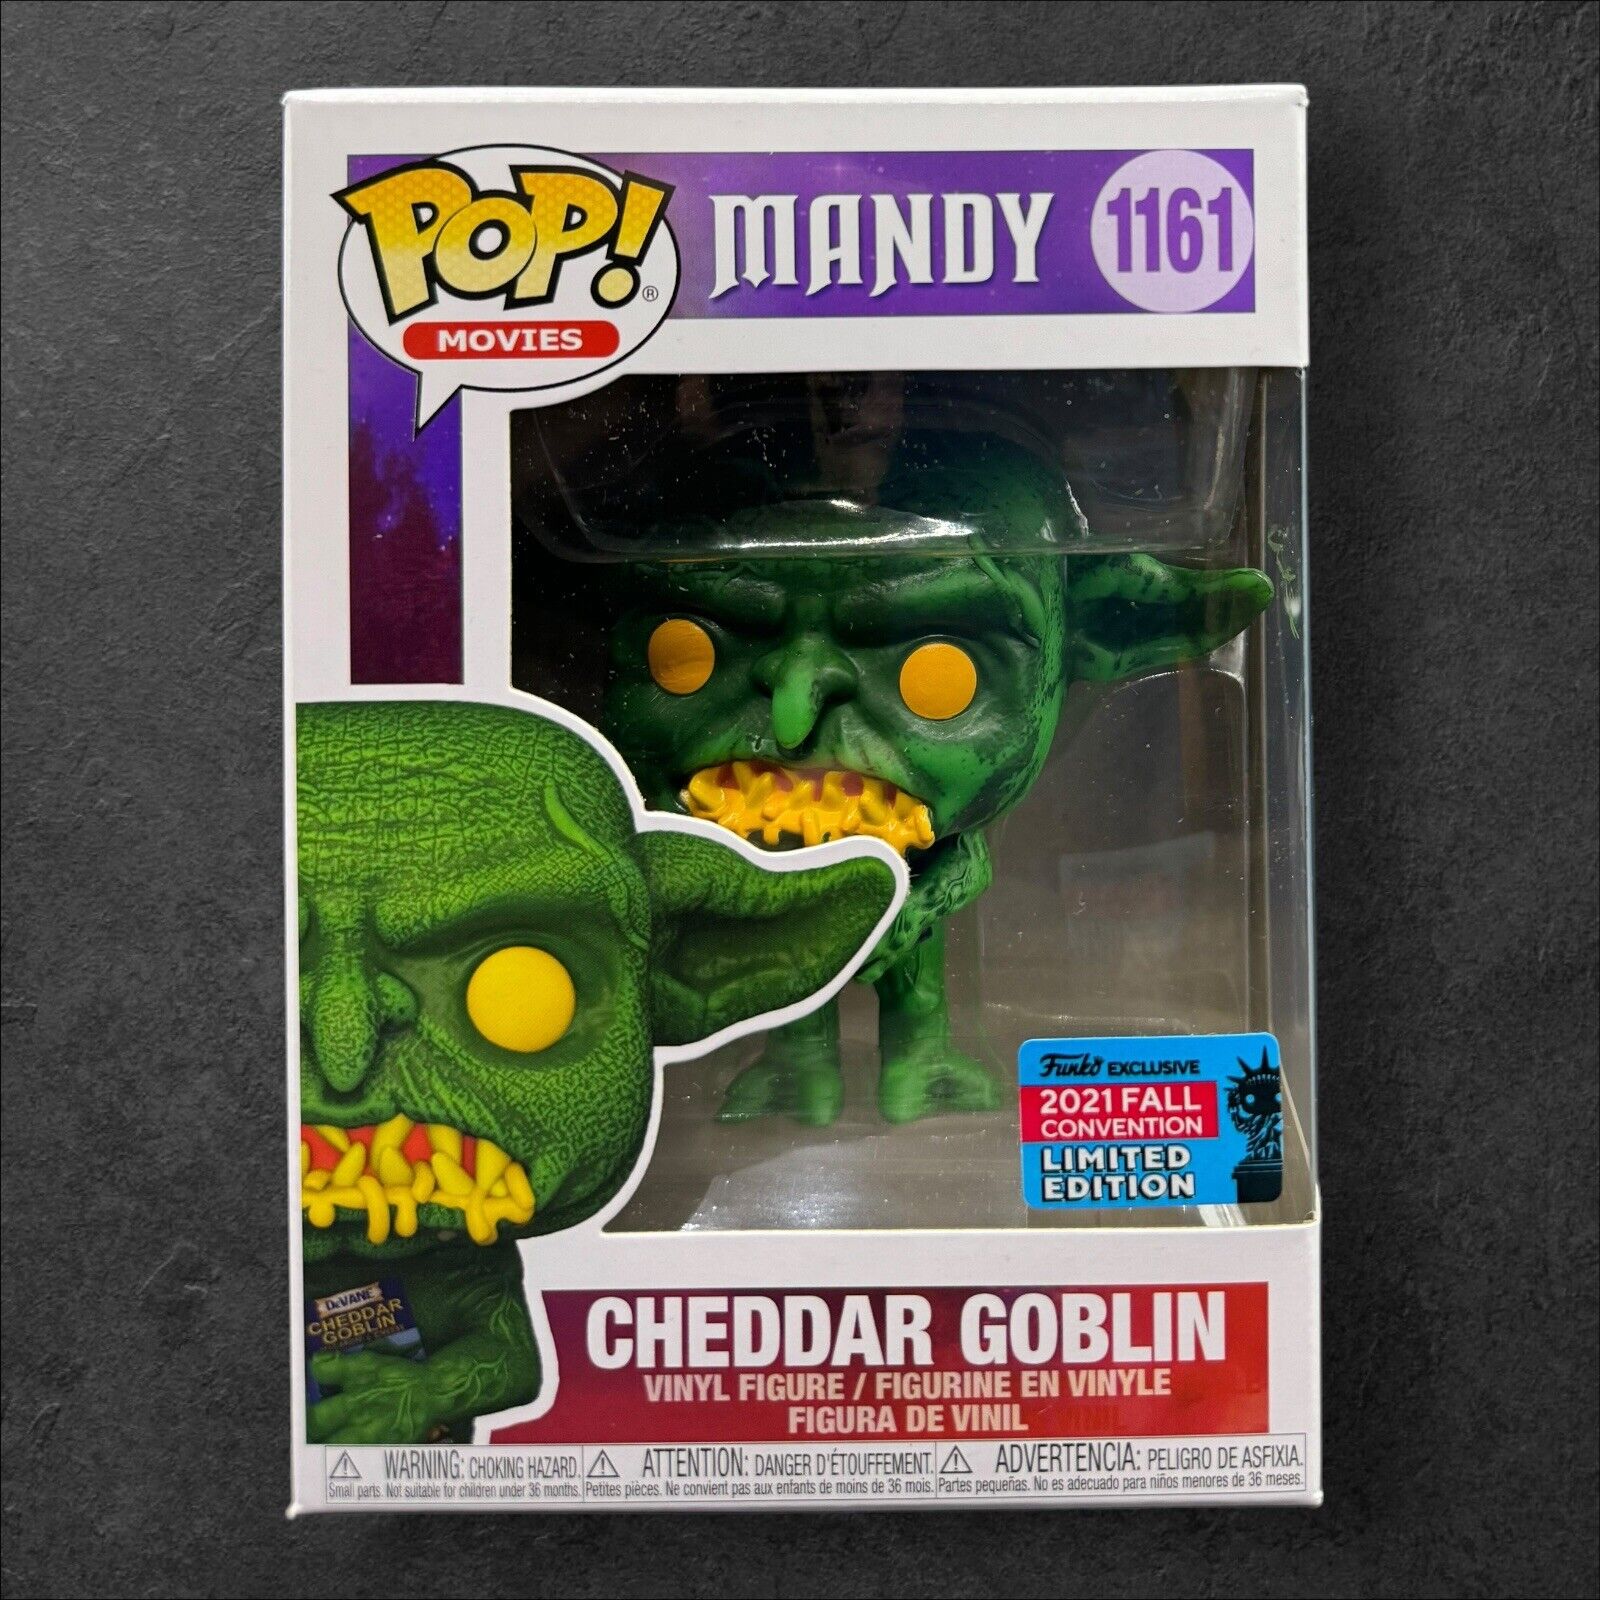 Cheddar Goblin #1161 (2021 NYCC Shared Fall Exclusive) FunkoPOP Movies: Mandy